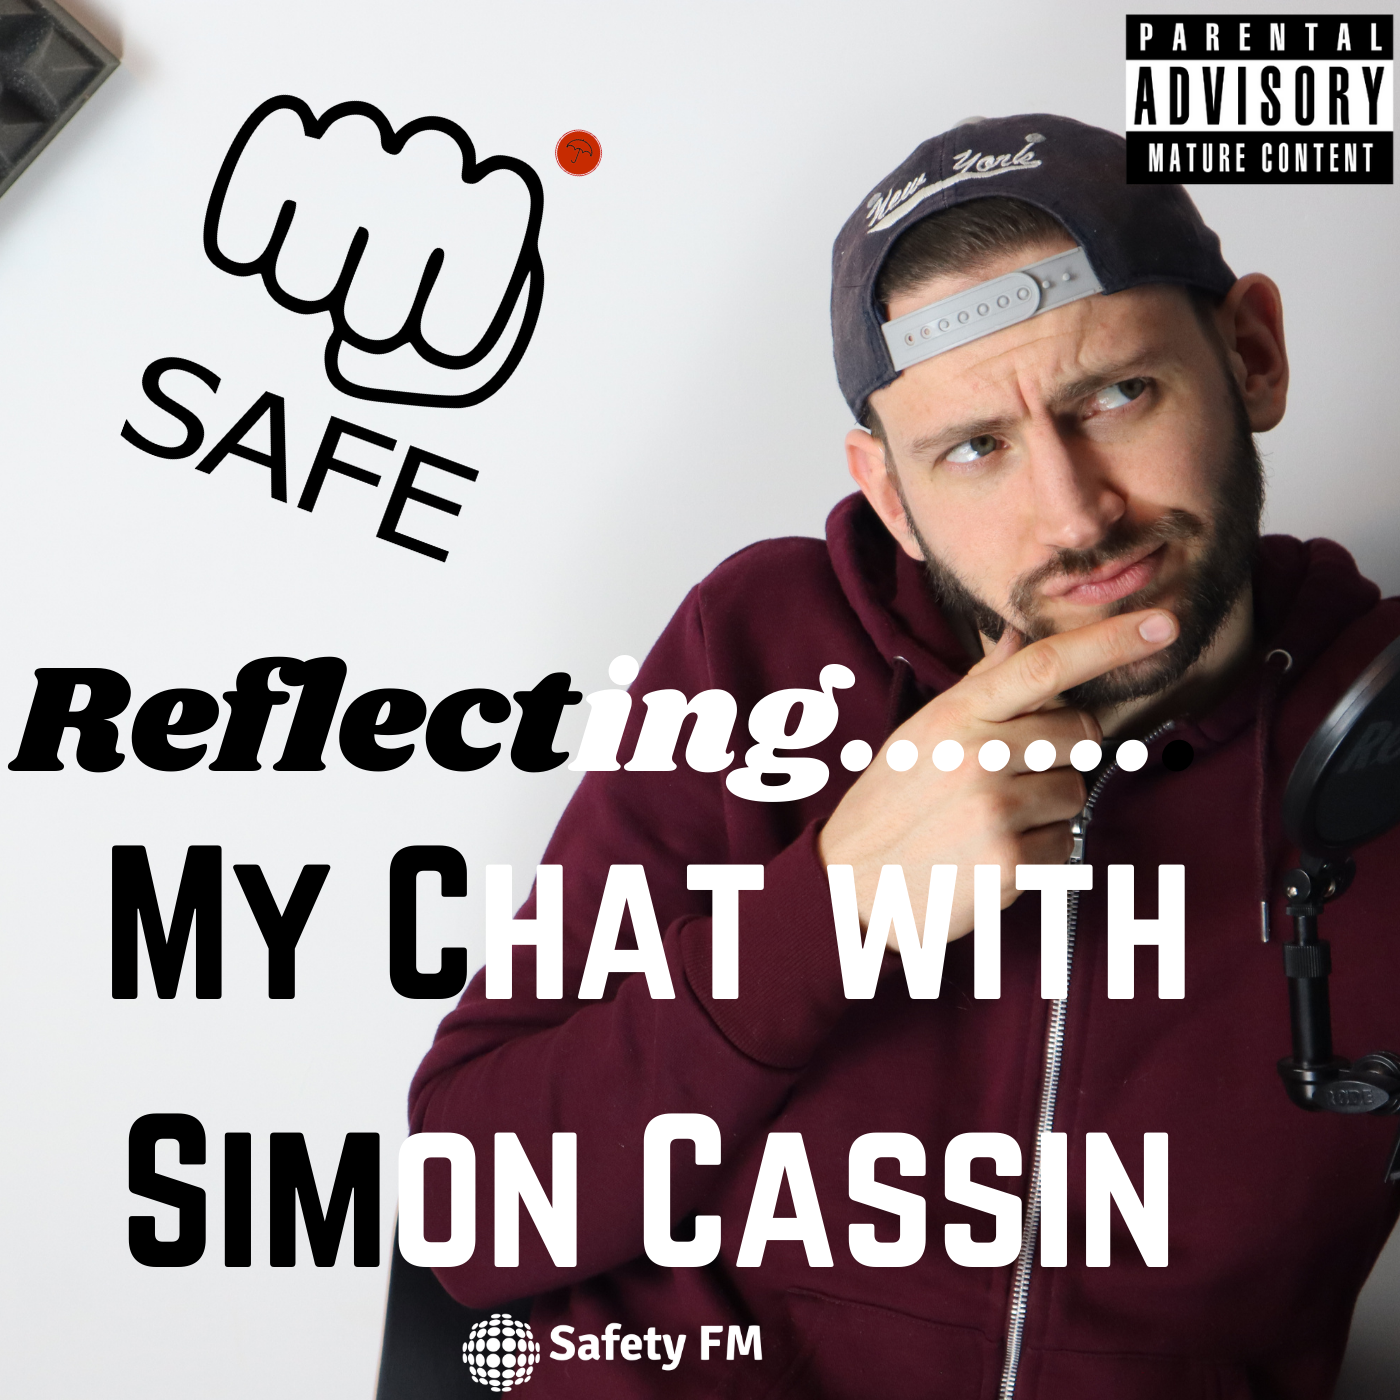 Reflecting on my chat with Simon Cassin